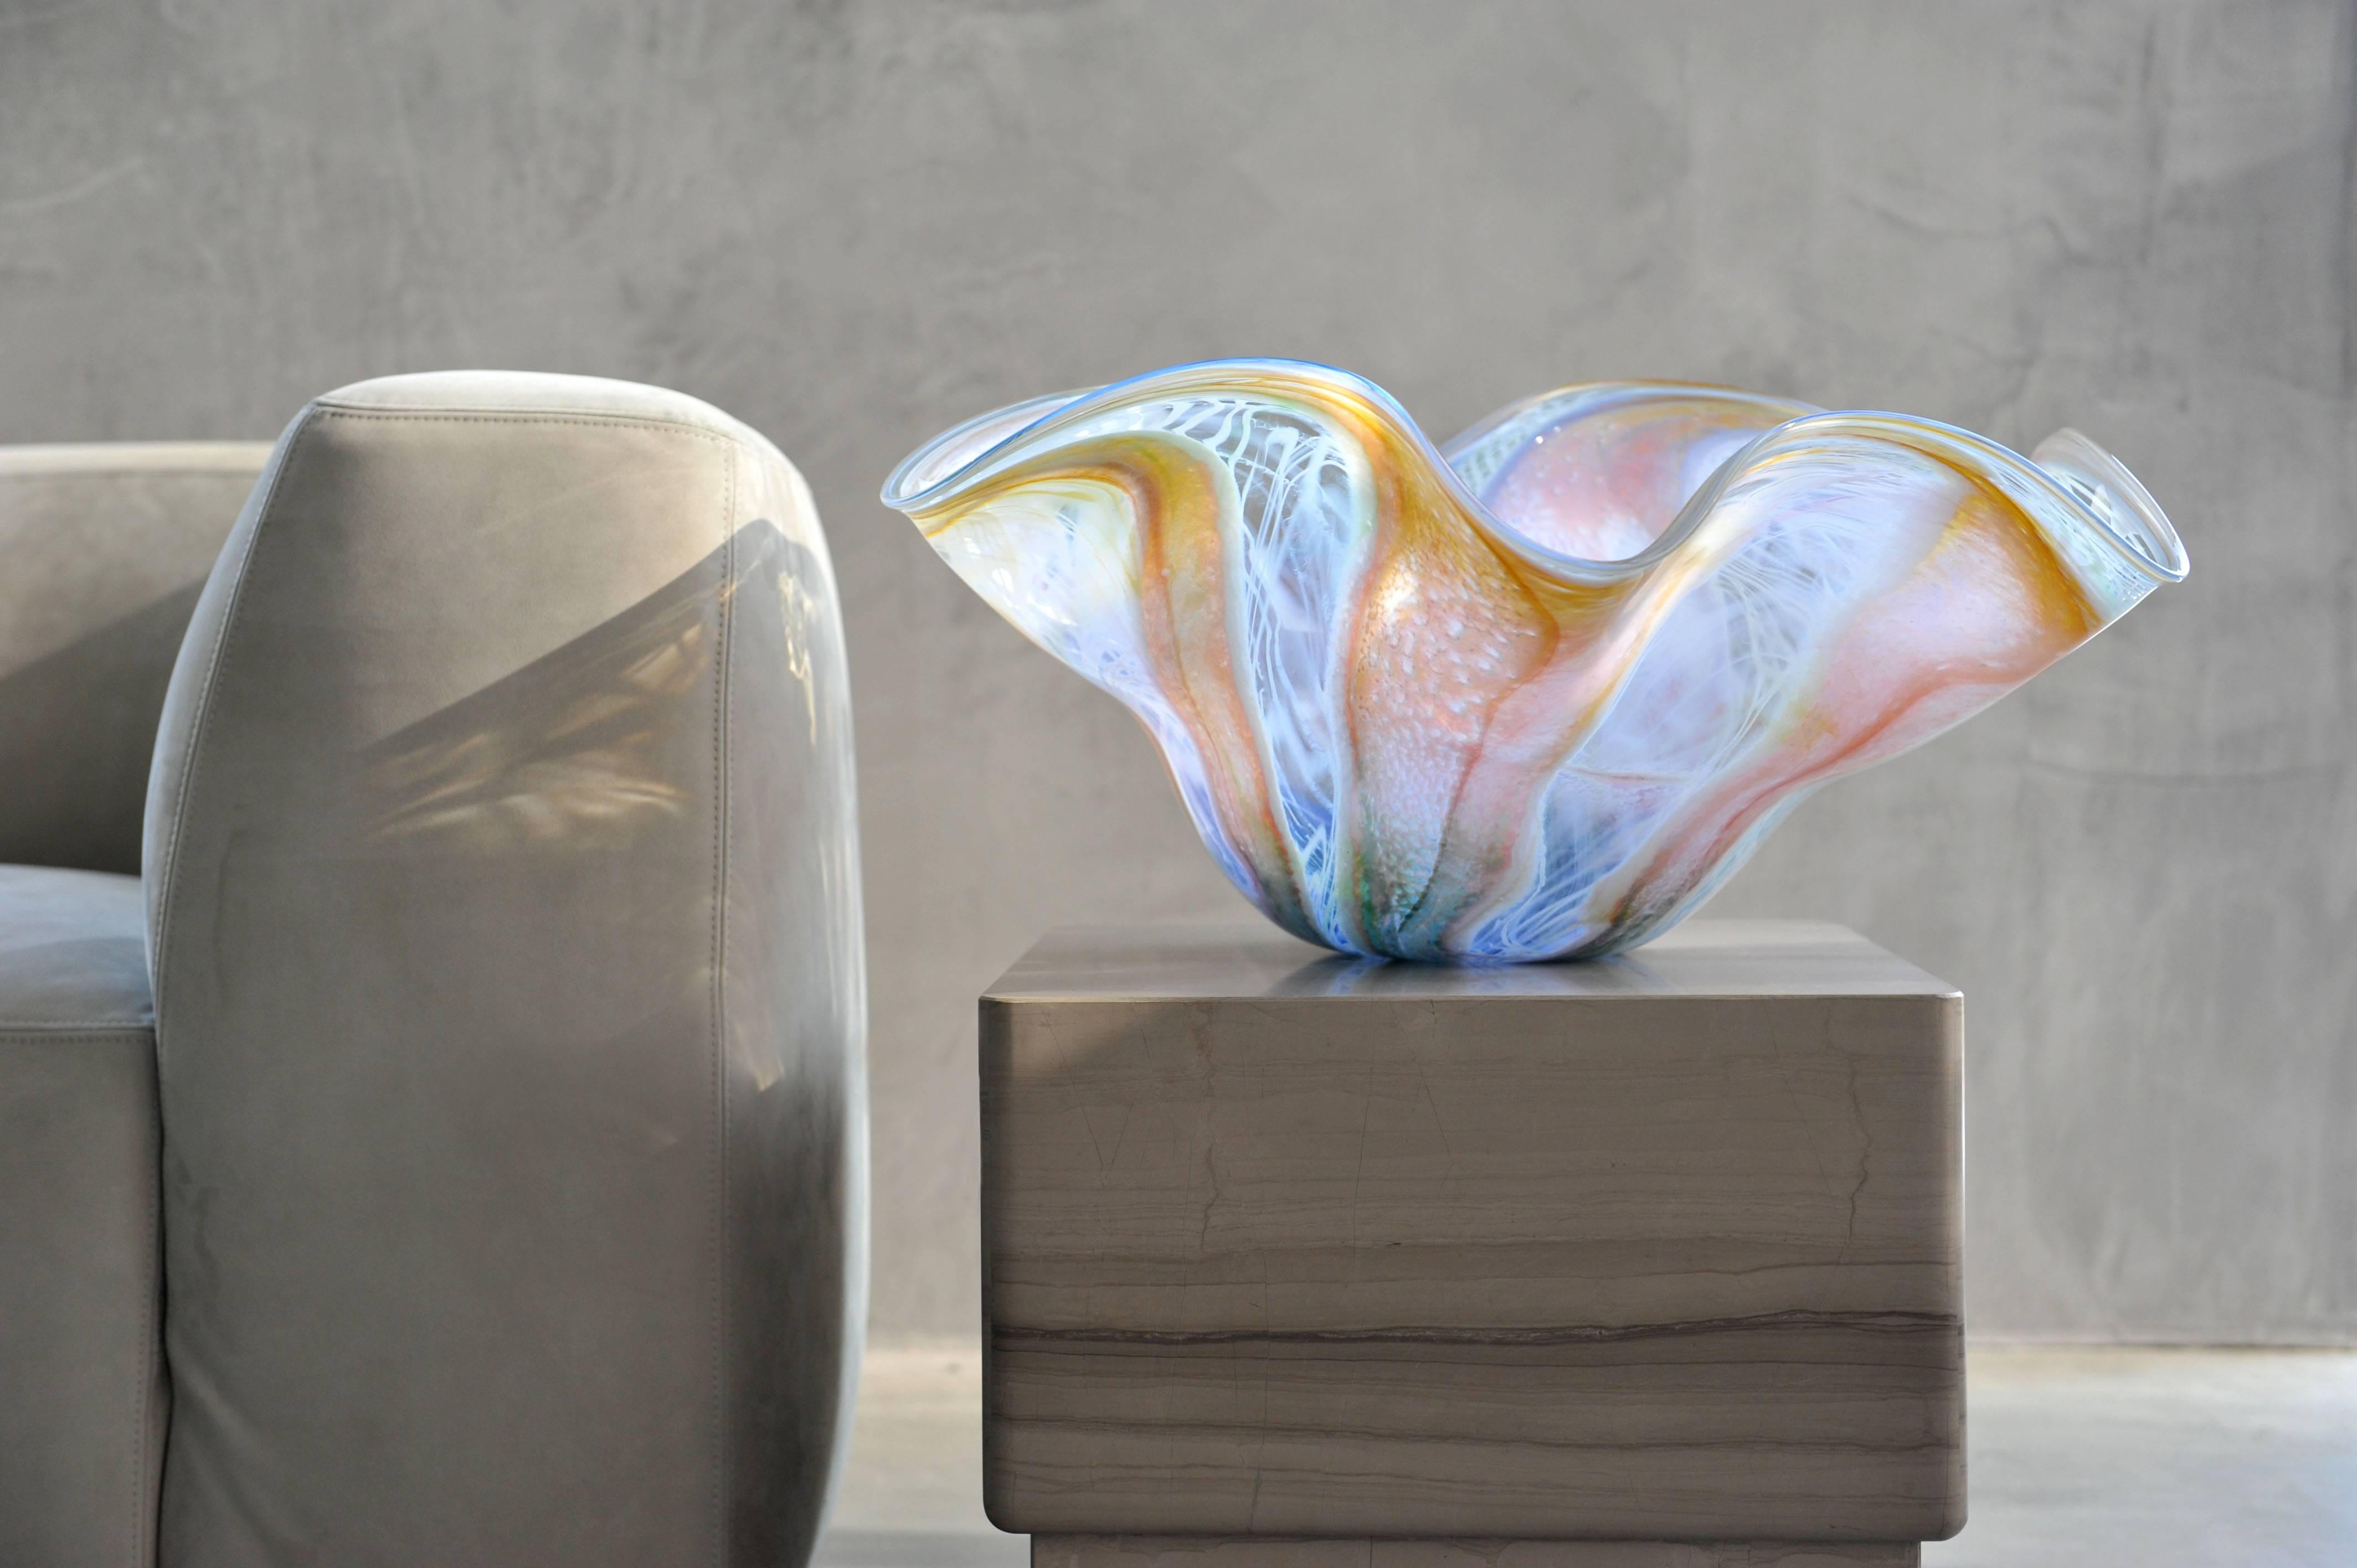 Blown Glass Decorative Bowl. Murano glass style colors in blue, pink, white. - Modern Sculpture by Richard Price